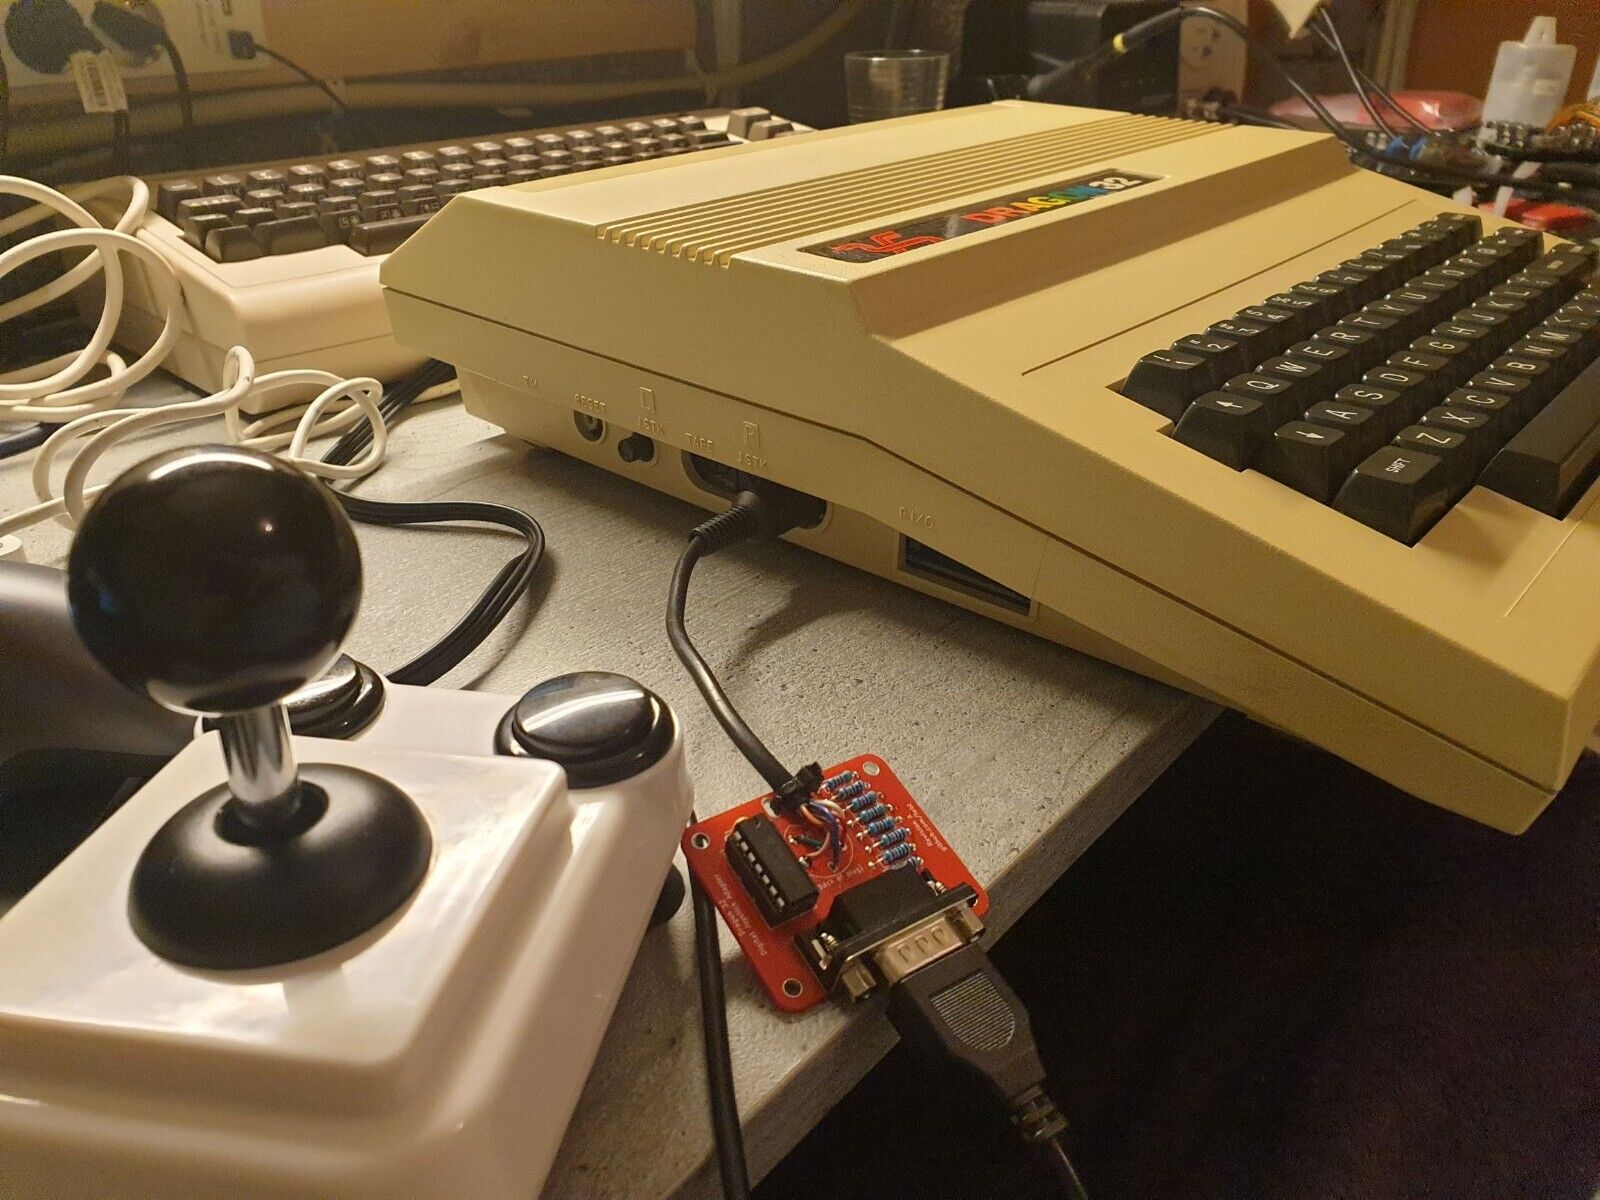 TRS-80 CoCo Computer Dragon 32/64 Universal Joystick Adapter Color Tandy